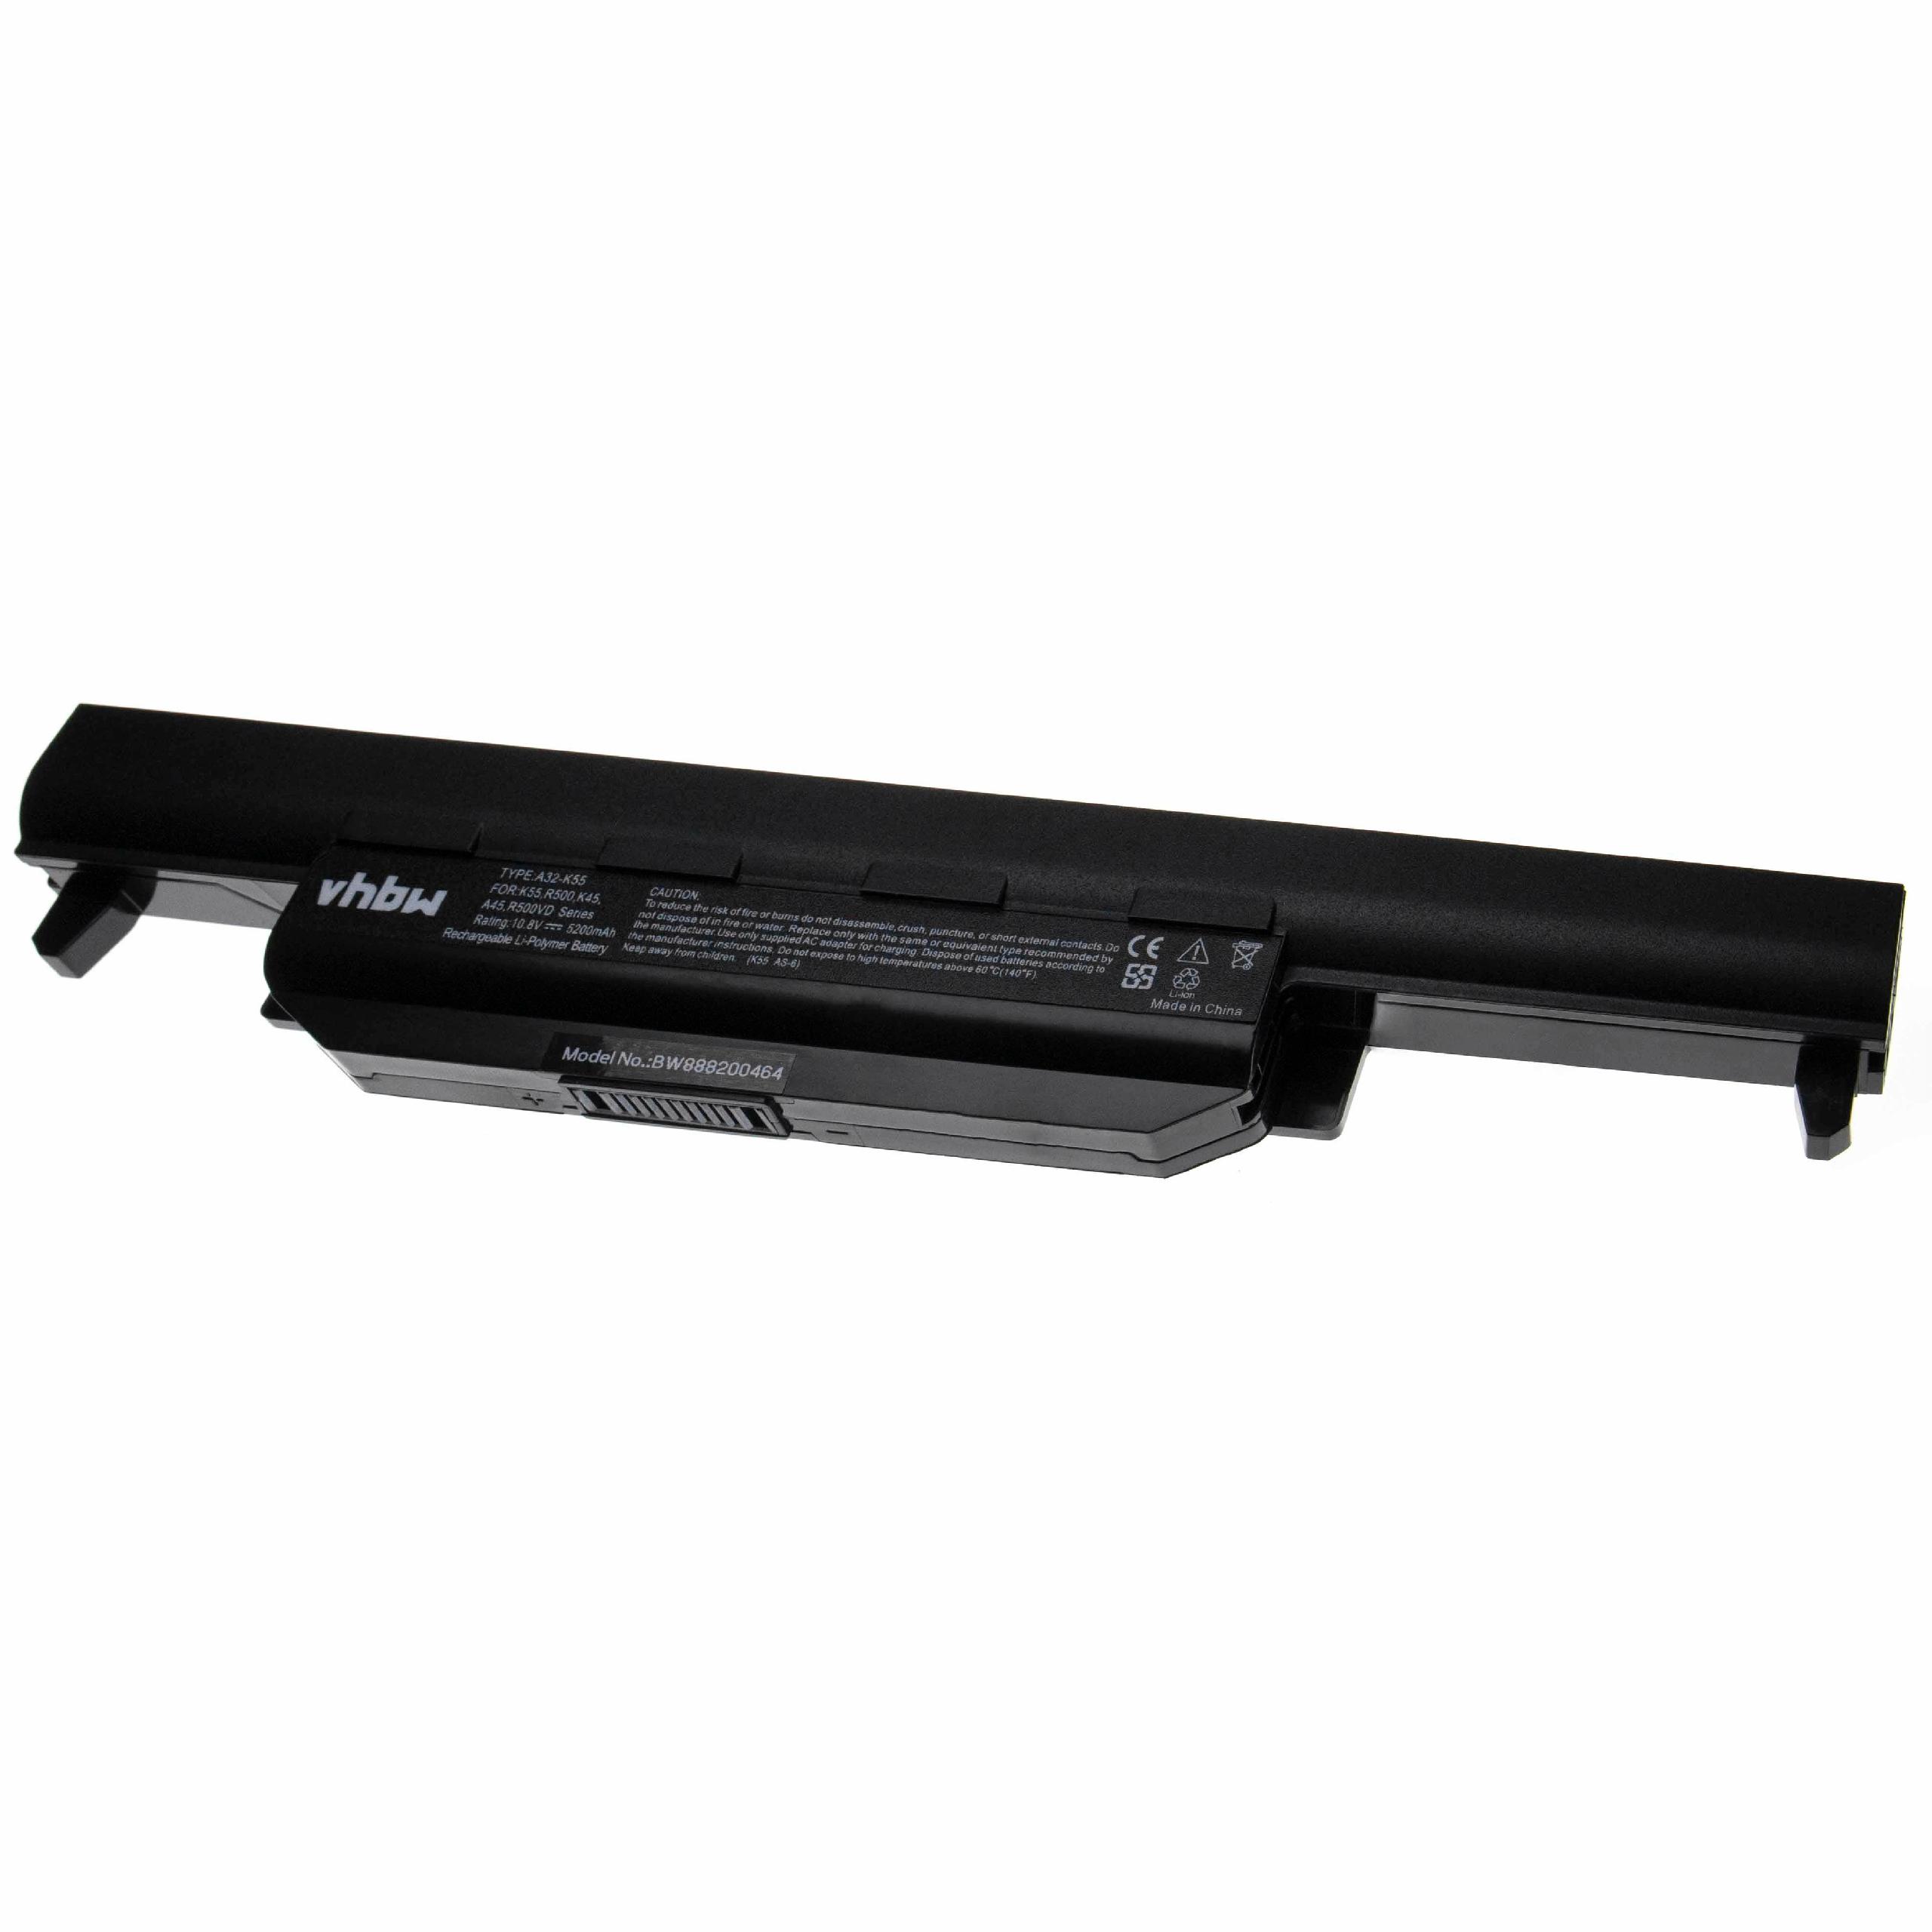 Notebook Battery Replacement for Asus A33-K55, A32-K55, A41-K55 - 5200mAh 10.8V Li-polymer, black